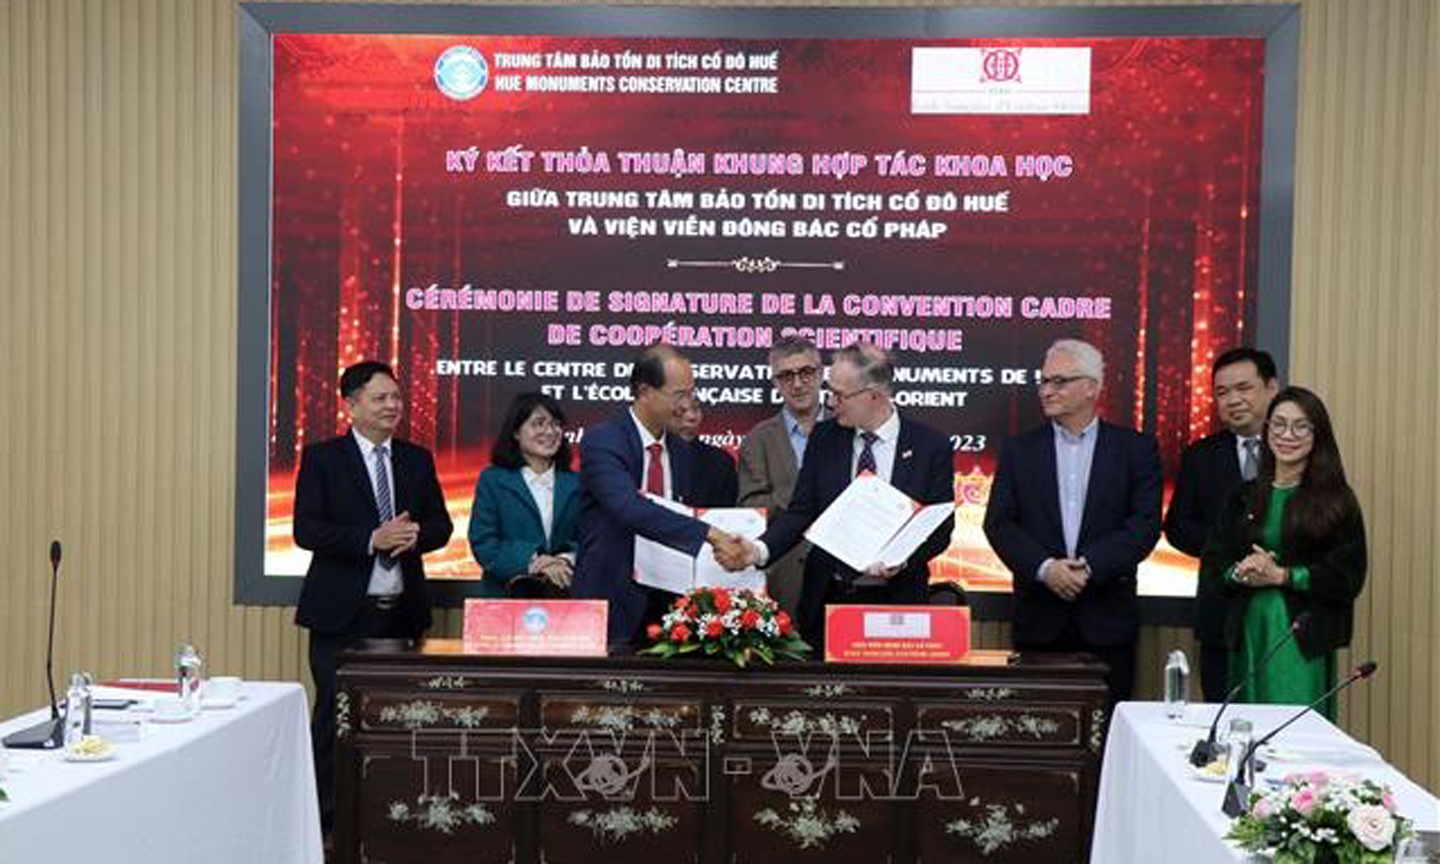 The Hue Monuments Conservation Centre and the French School of Asian Studies (EFEO) signs a framework agreement on scientific research cooperation in preservation of cultural heritage on February 16 (Photo: VNA).